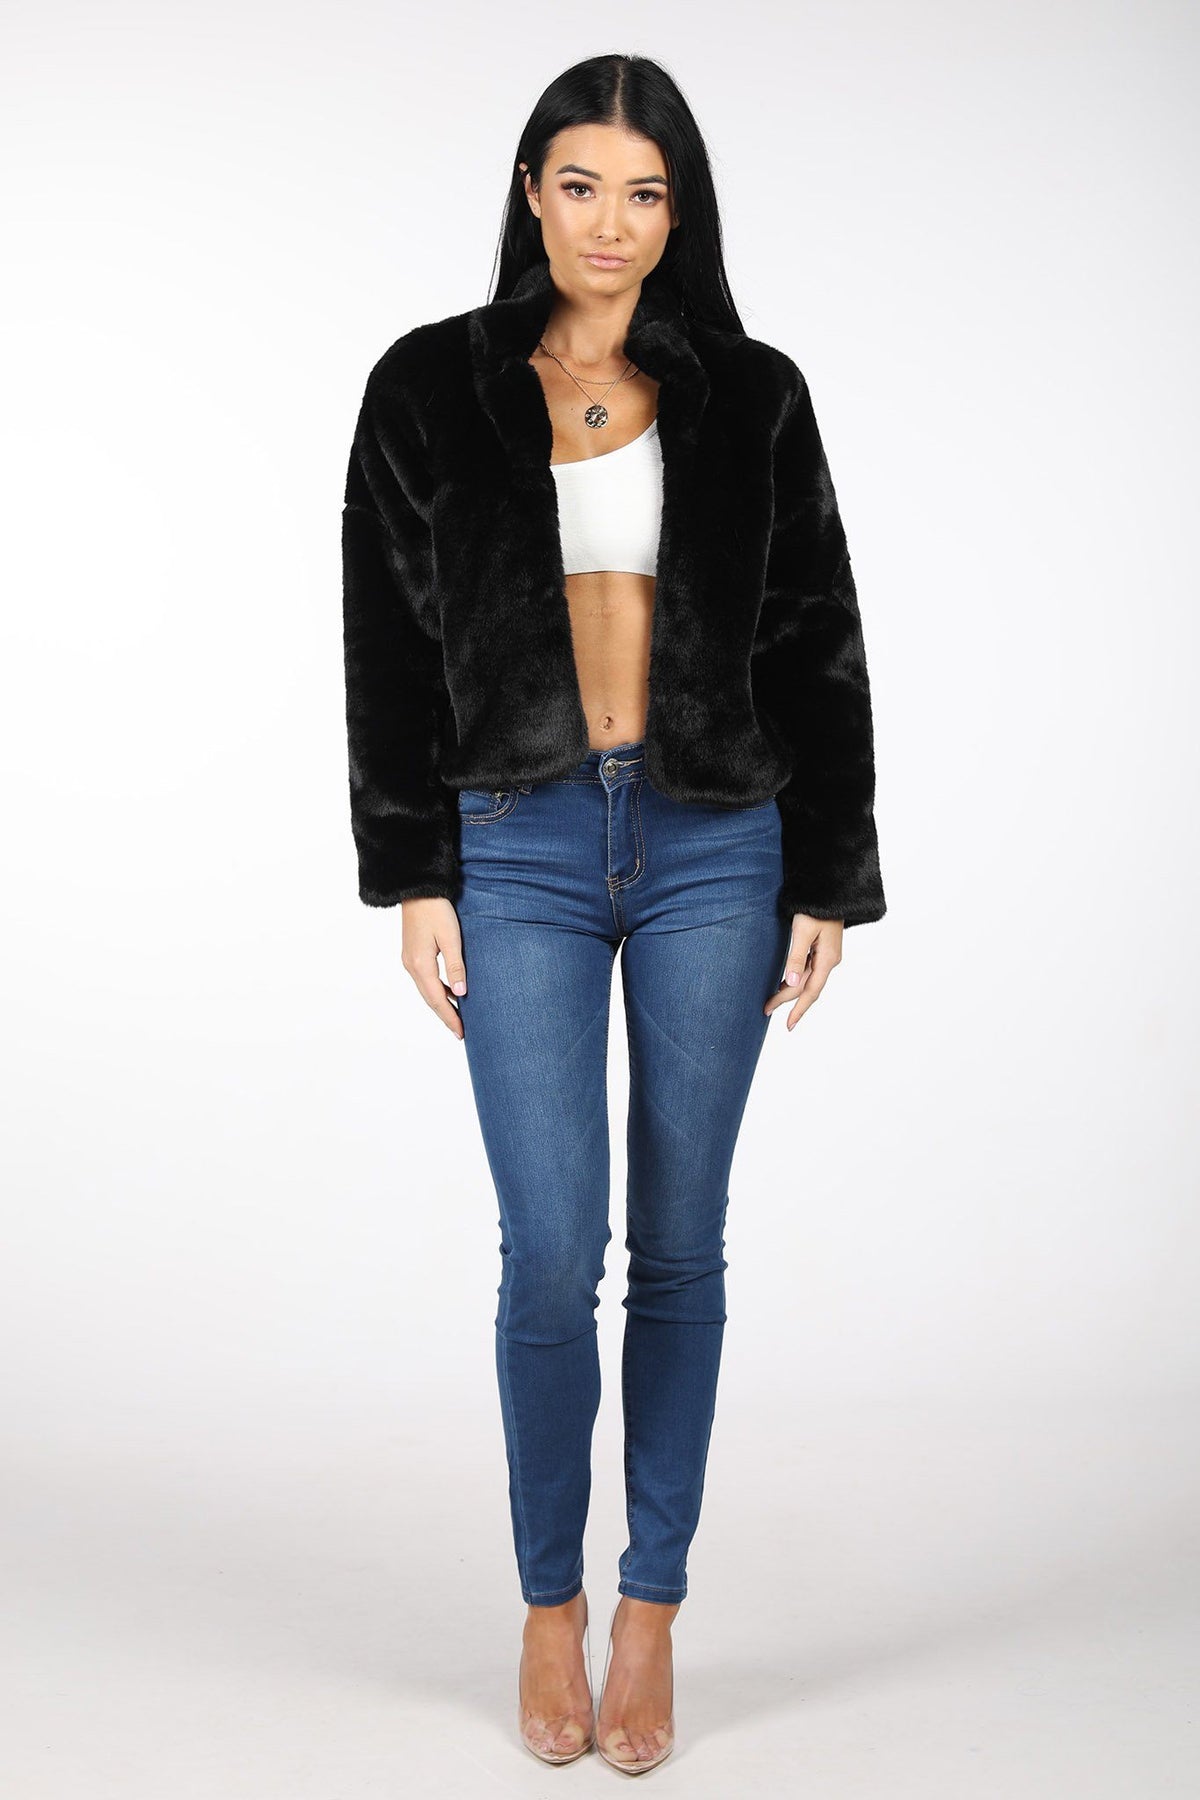 Black Cropped Faux Fur Coat Styled with White Cropped Top and Denim Skinny Jeans